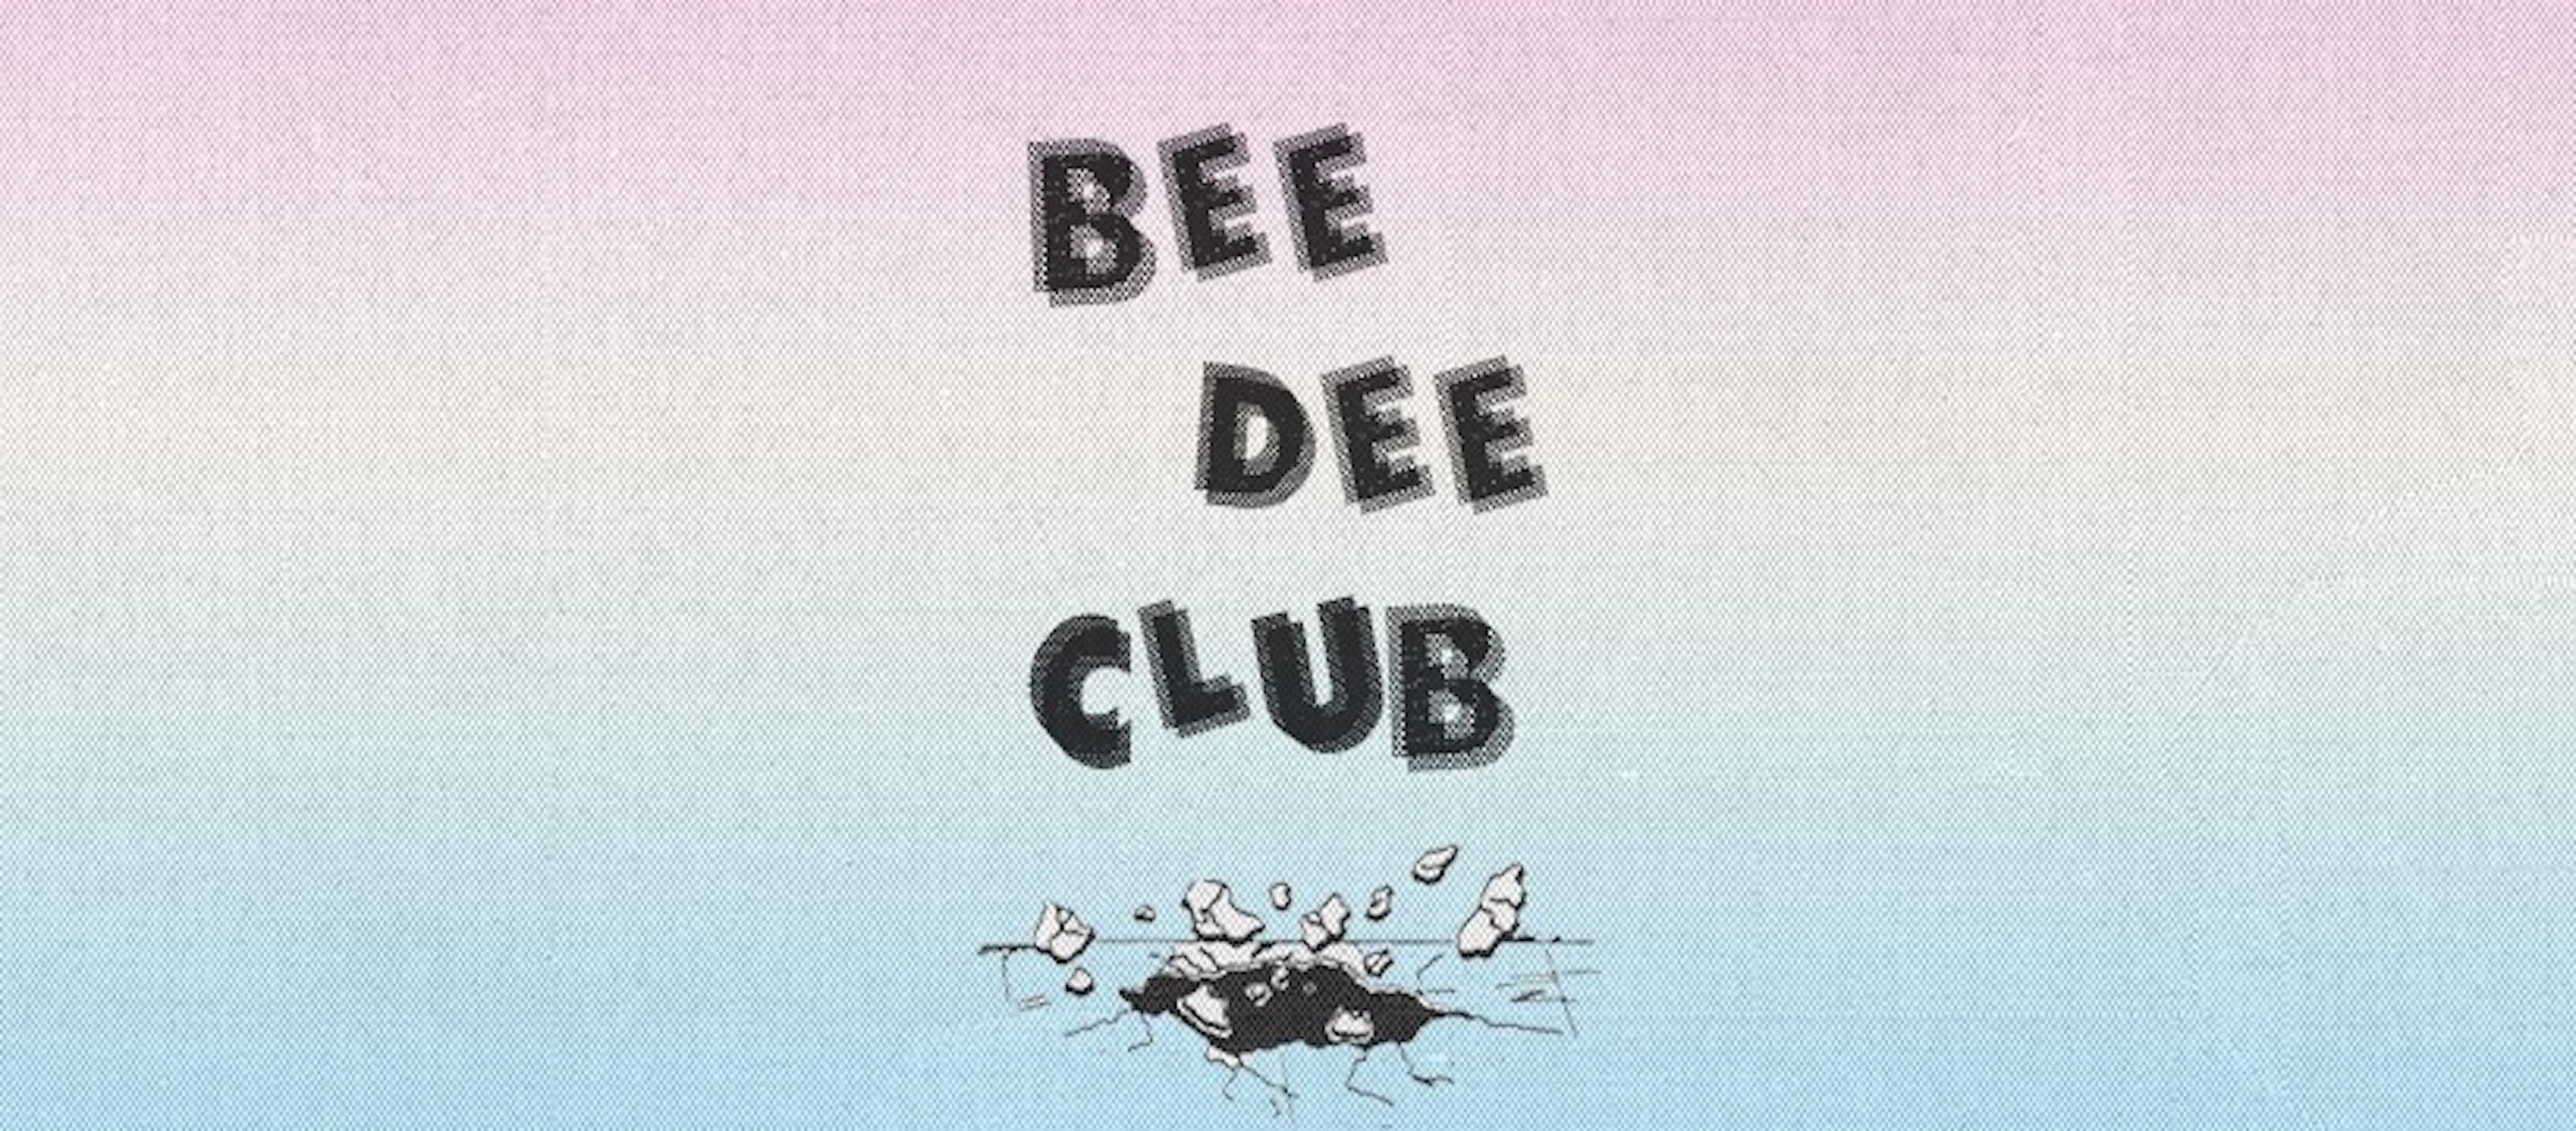 B & D Club - Rendezvous w/B From E & Dee Brown - フライヤー表